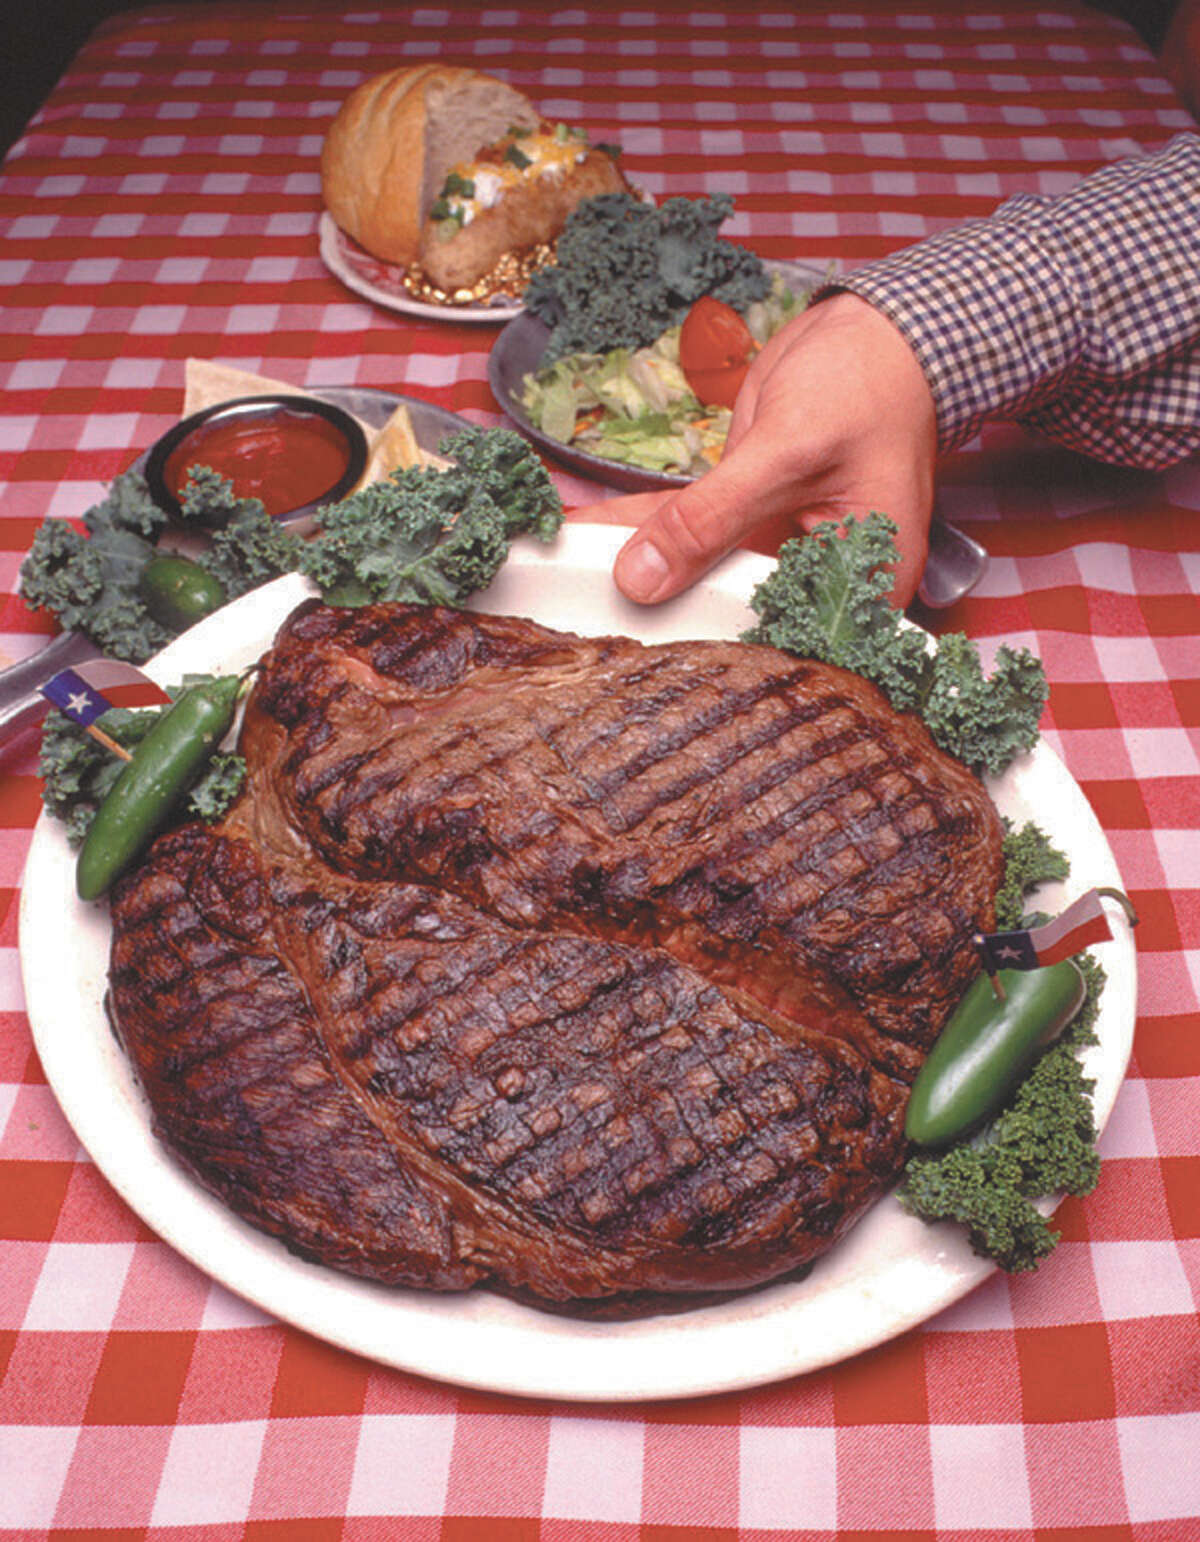 If you can eat the 72-ounce steak at the Big Texan restaurant in Amarillo in one hour, it's free. Not many succeed, but a competitive eater from Nebraska has set a record by devouring two of the huge steaks. Still hungry? While they aren't all record-breaking, click ahead to see more dishes in the Alamo City, Texas and around the globe that will fill you up ... and then some.